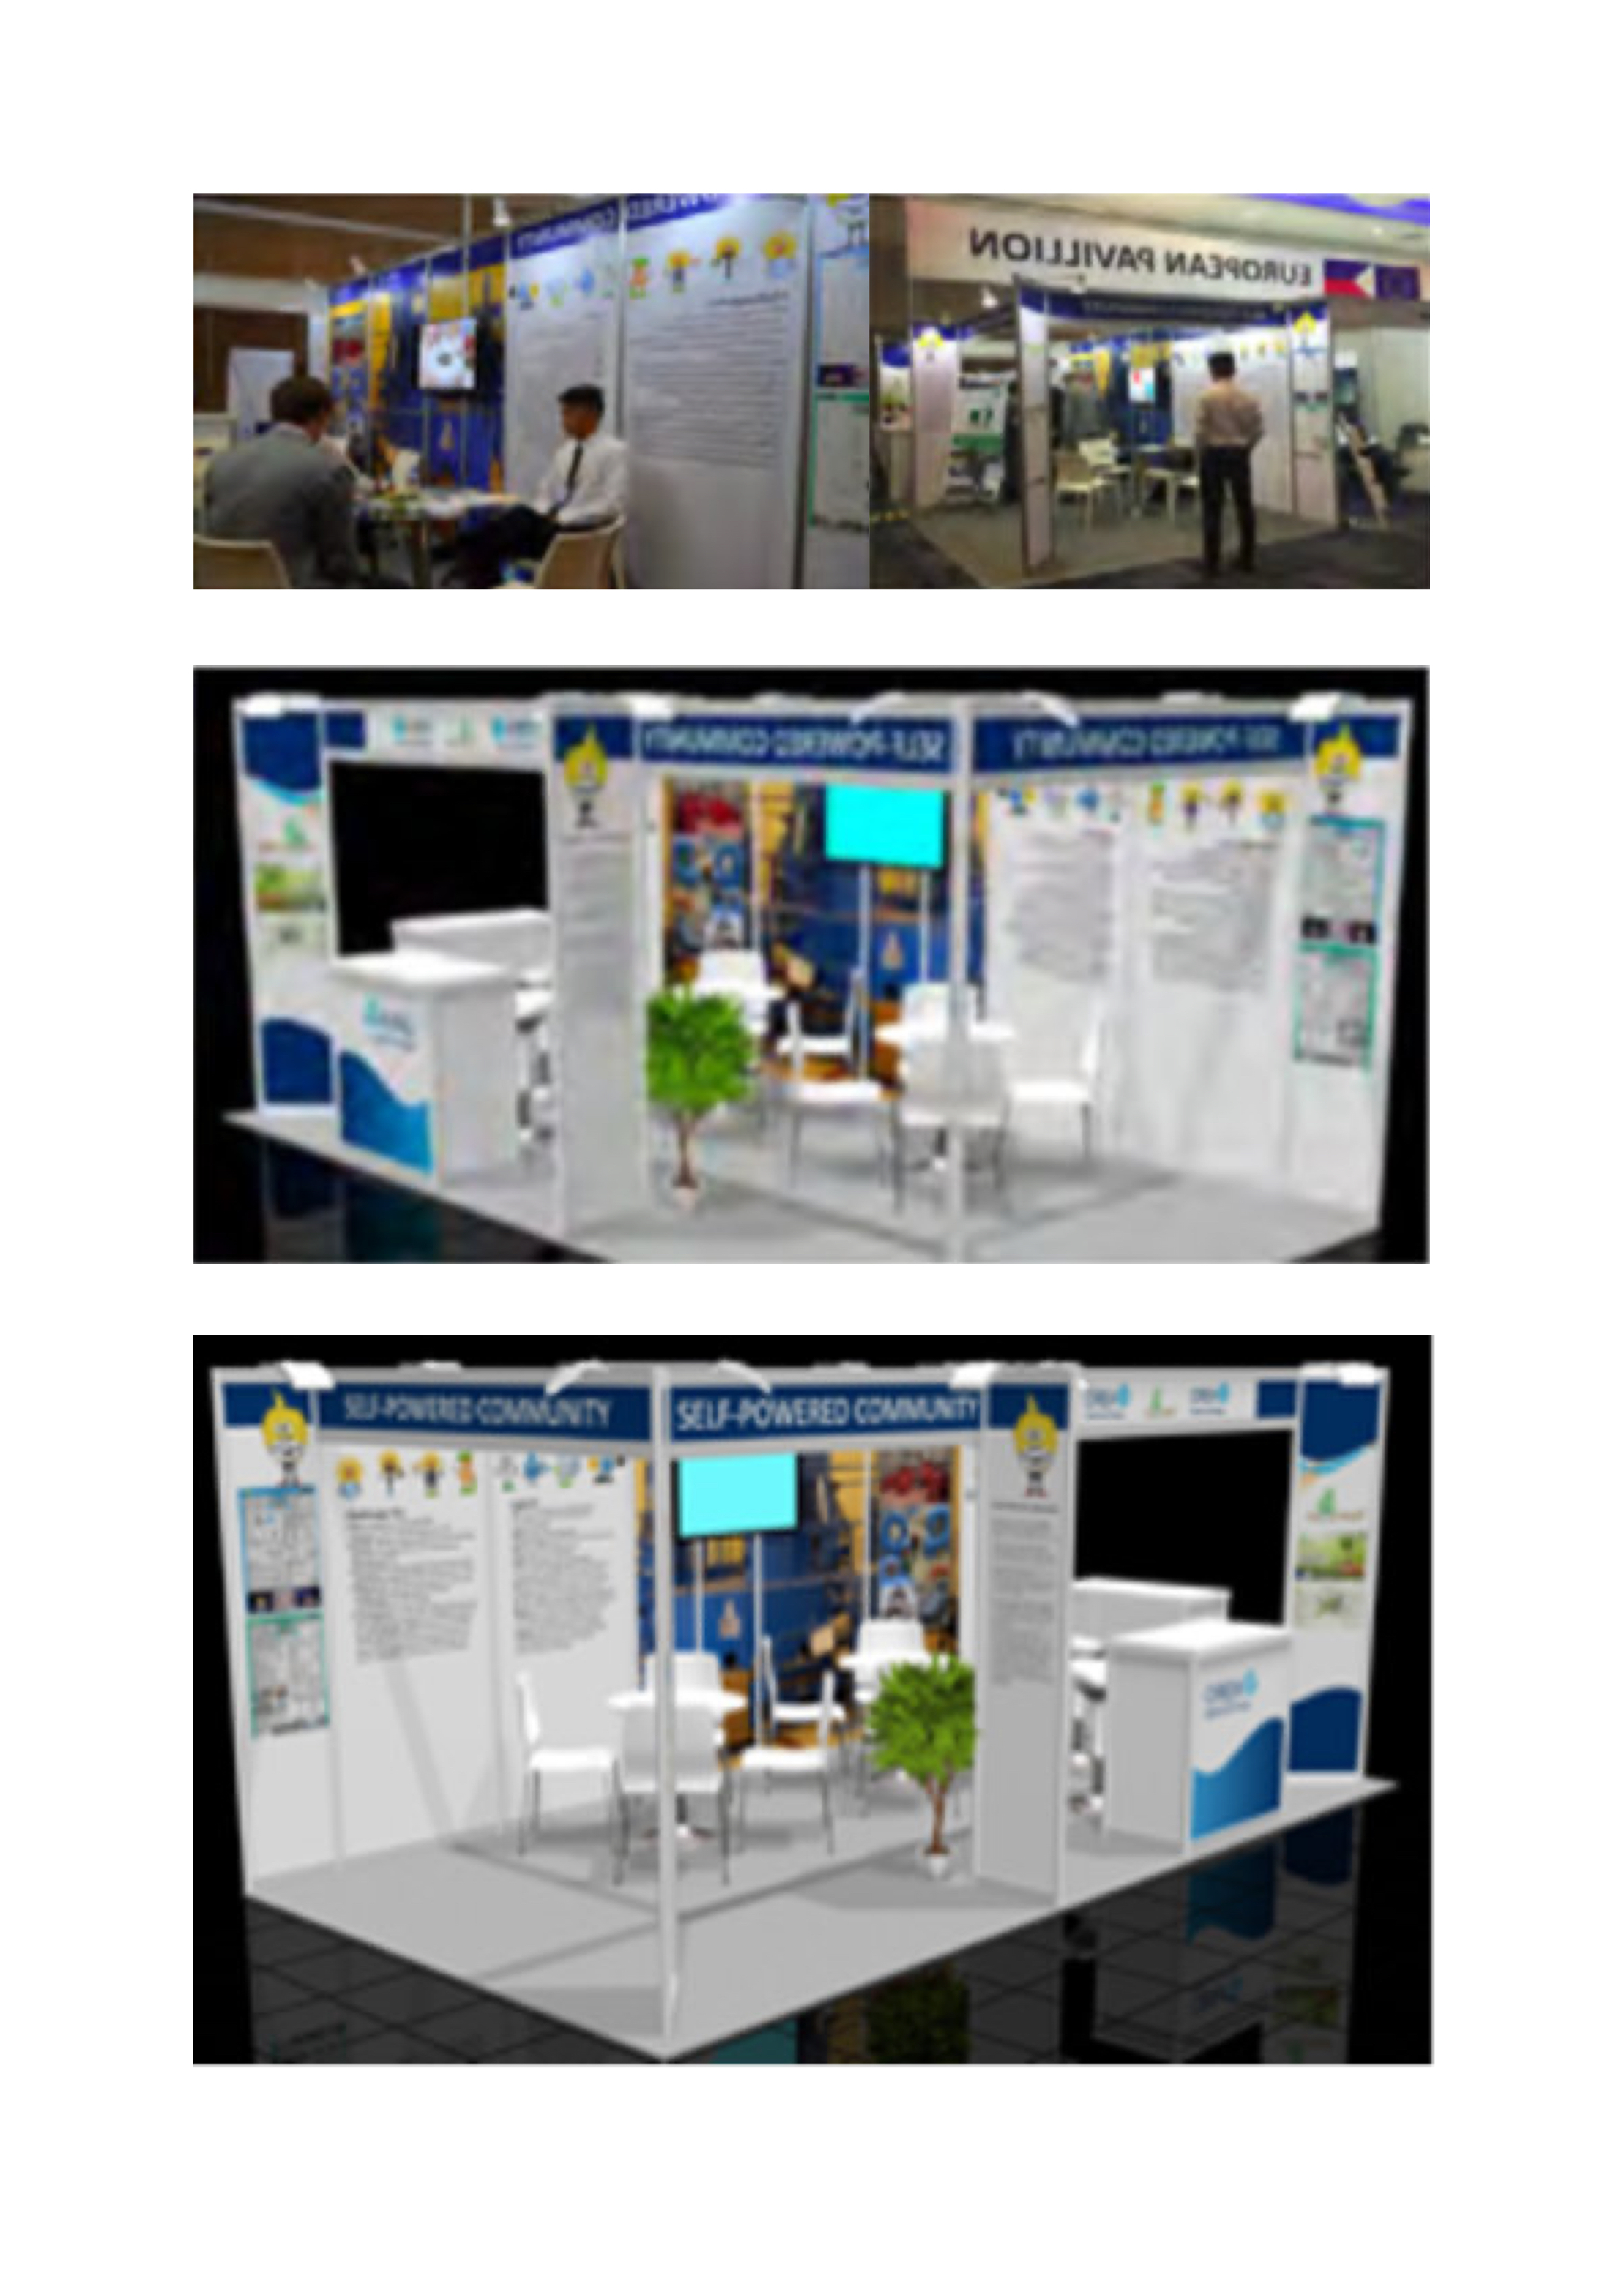 Exhibition: Wall Chart Posters, Poster A, B, C, D, and E, prepared for Energy Smart Mission (ESM)